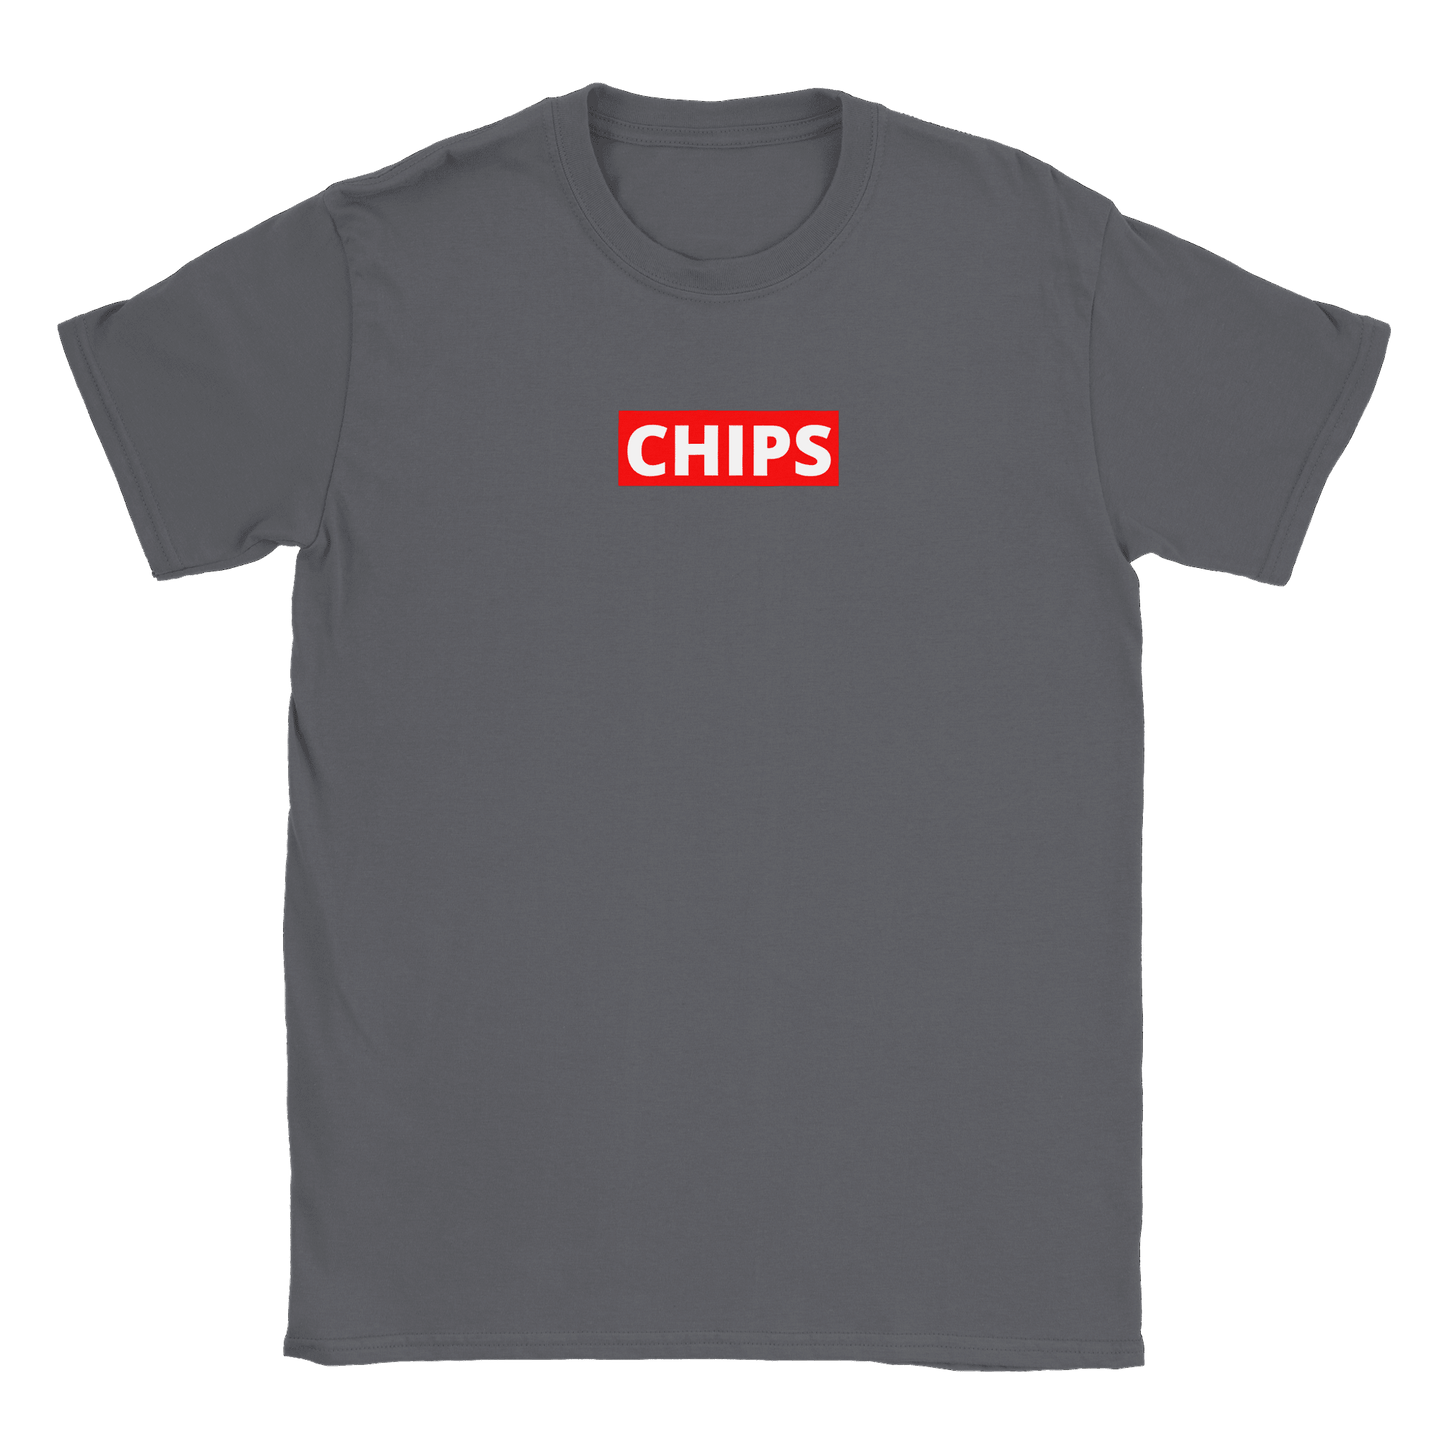 CHIPS - T-shirt Charcoal